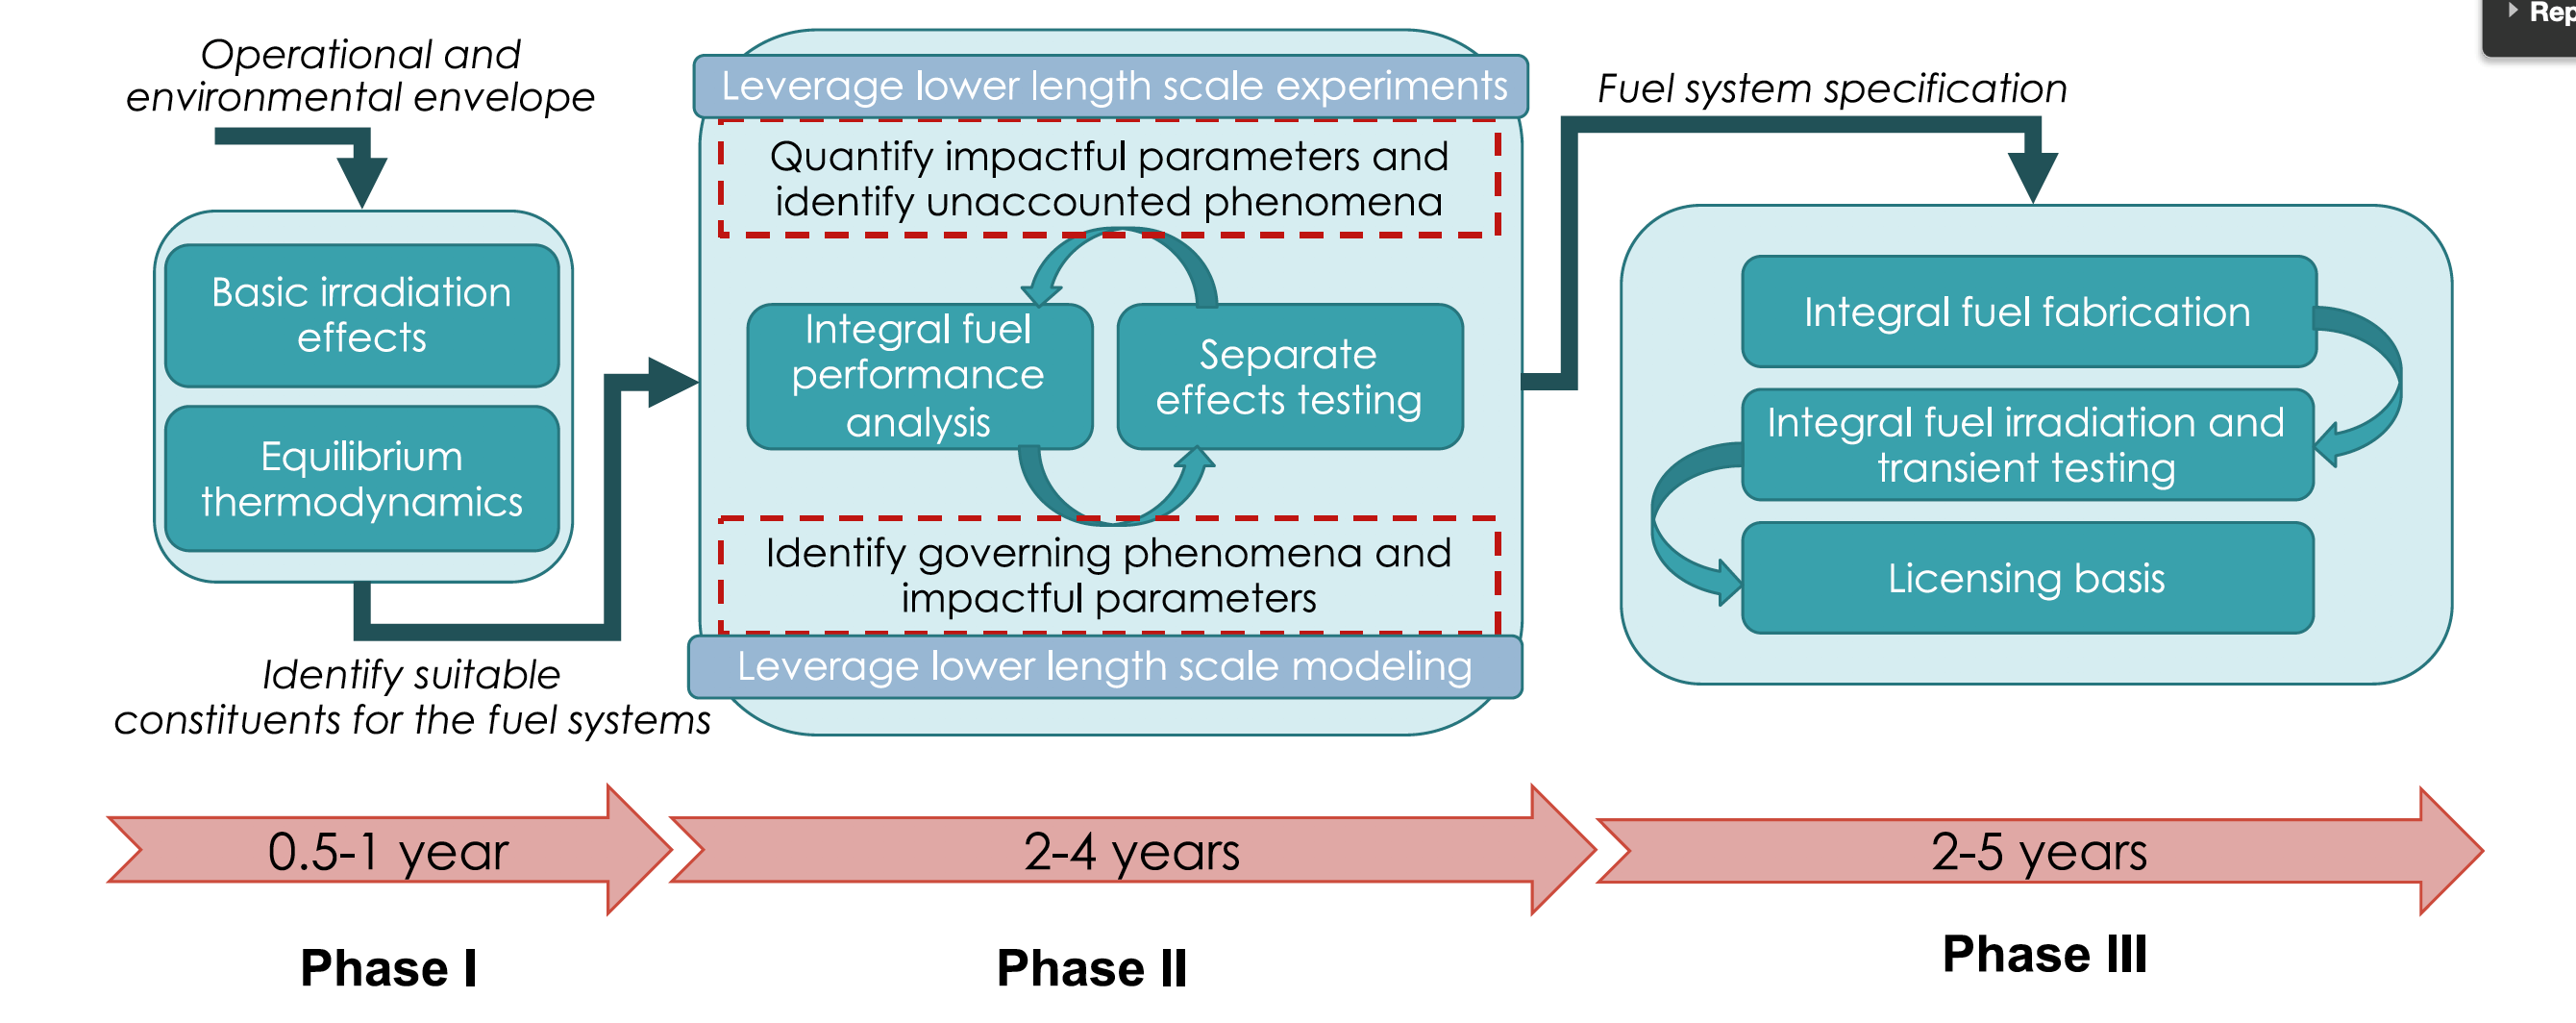 The process workflow for accelerated fuel qualification consists of three distinct phases. The information generated and the decisions made at the end of each phase guide and orient the subsequent work to efficiently reach a successful outcome. Advanced modeling and simulation methods made available only within the past decade are at the core of this approach to facilitate constituent and system selection in Phase I, produce functional integral fuel performance designs in Phase II, and provide the licensing basis in Phase III.